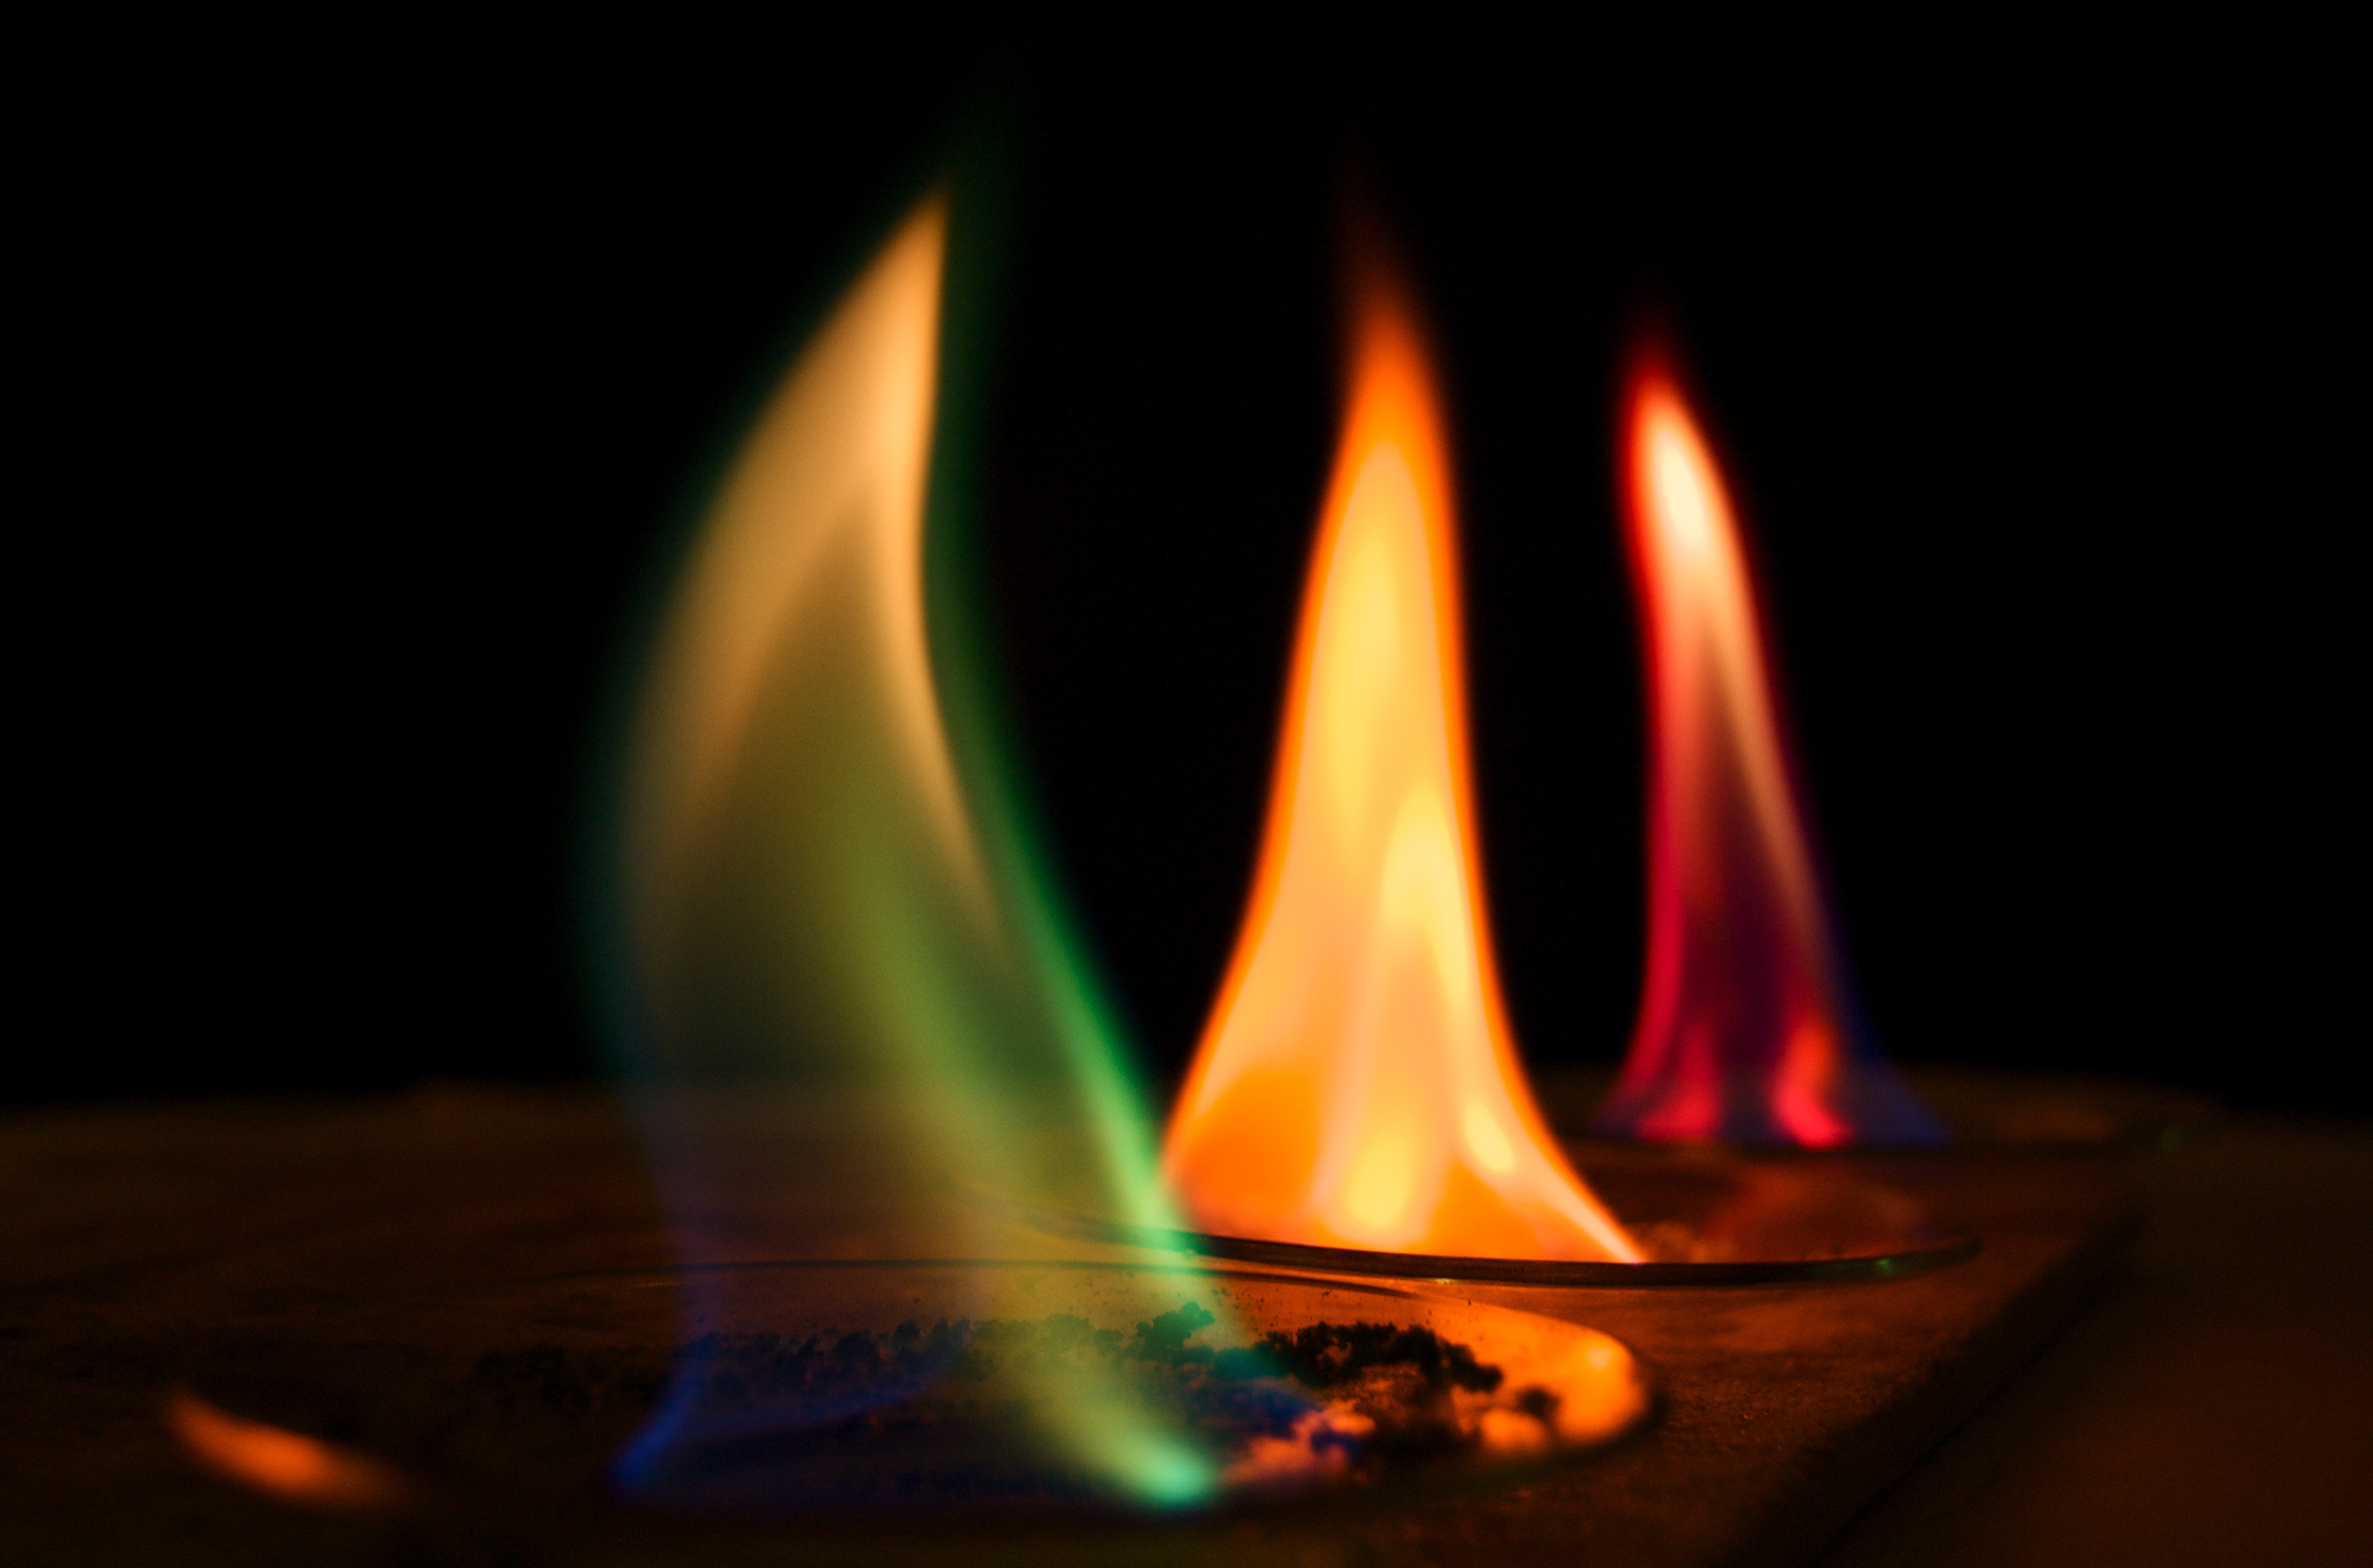 Salts burn with characteristic coloured flames, in this demonstration photographed at the Centre for Life, Newcastle.